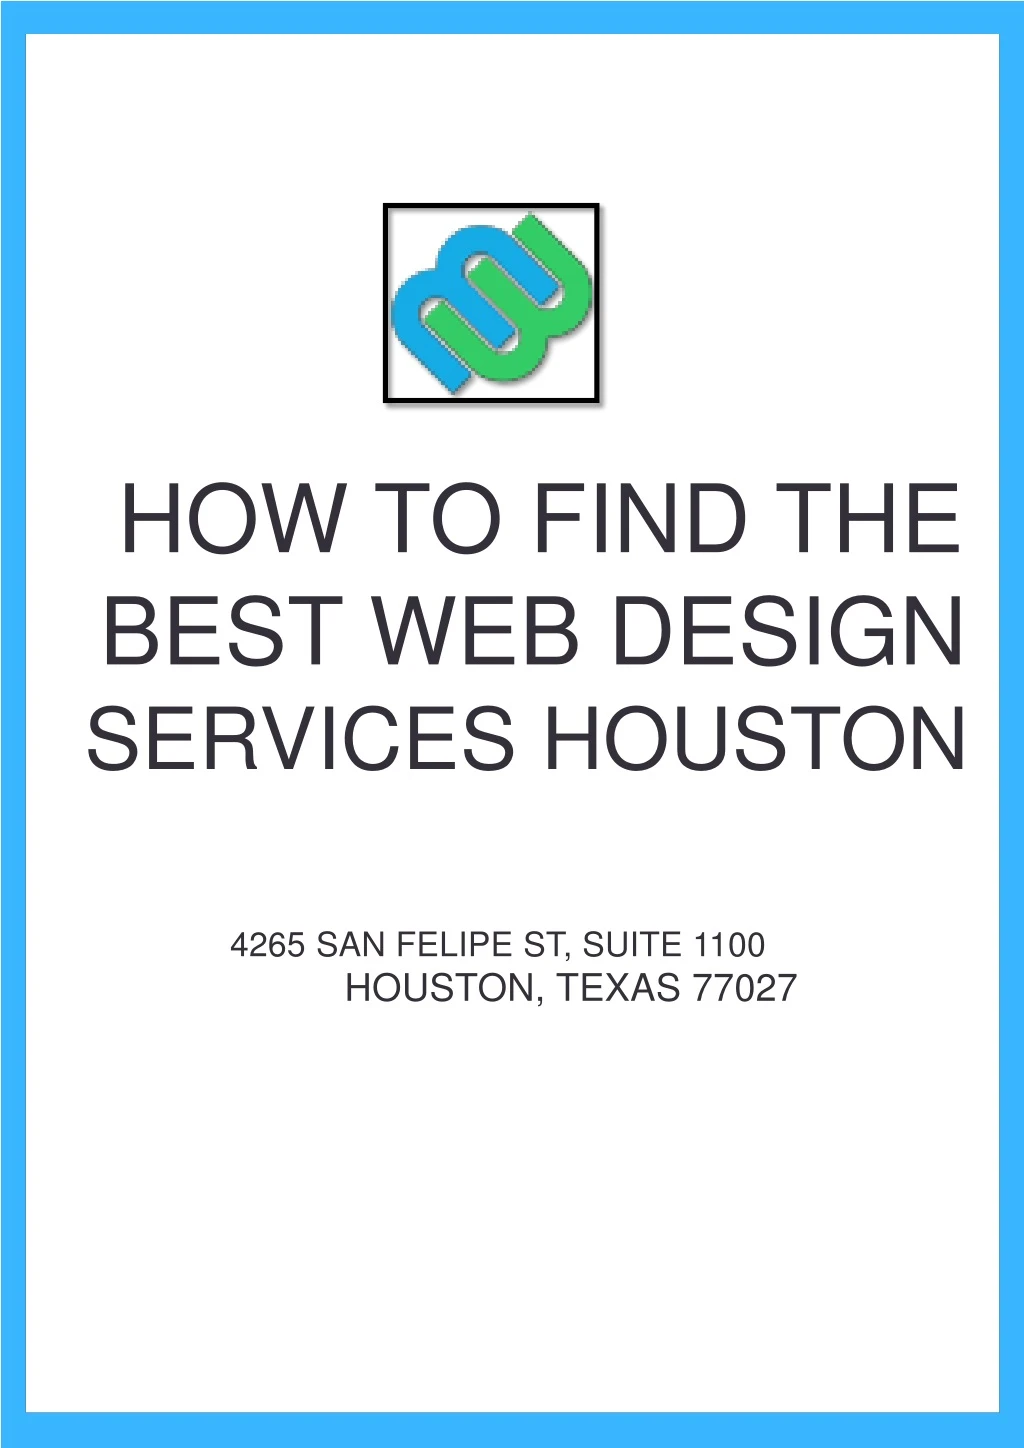 how to find the best web design services houston